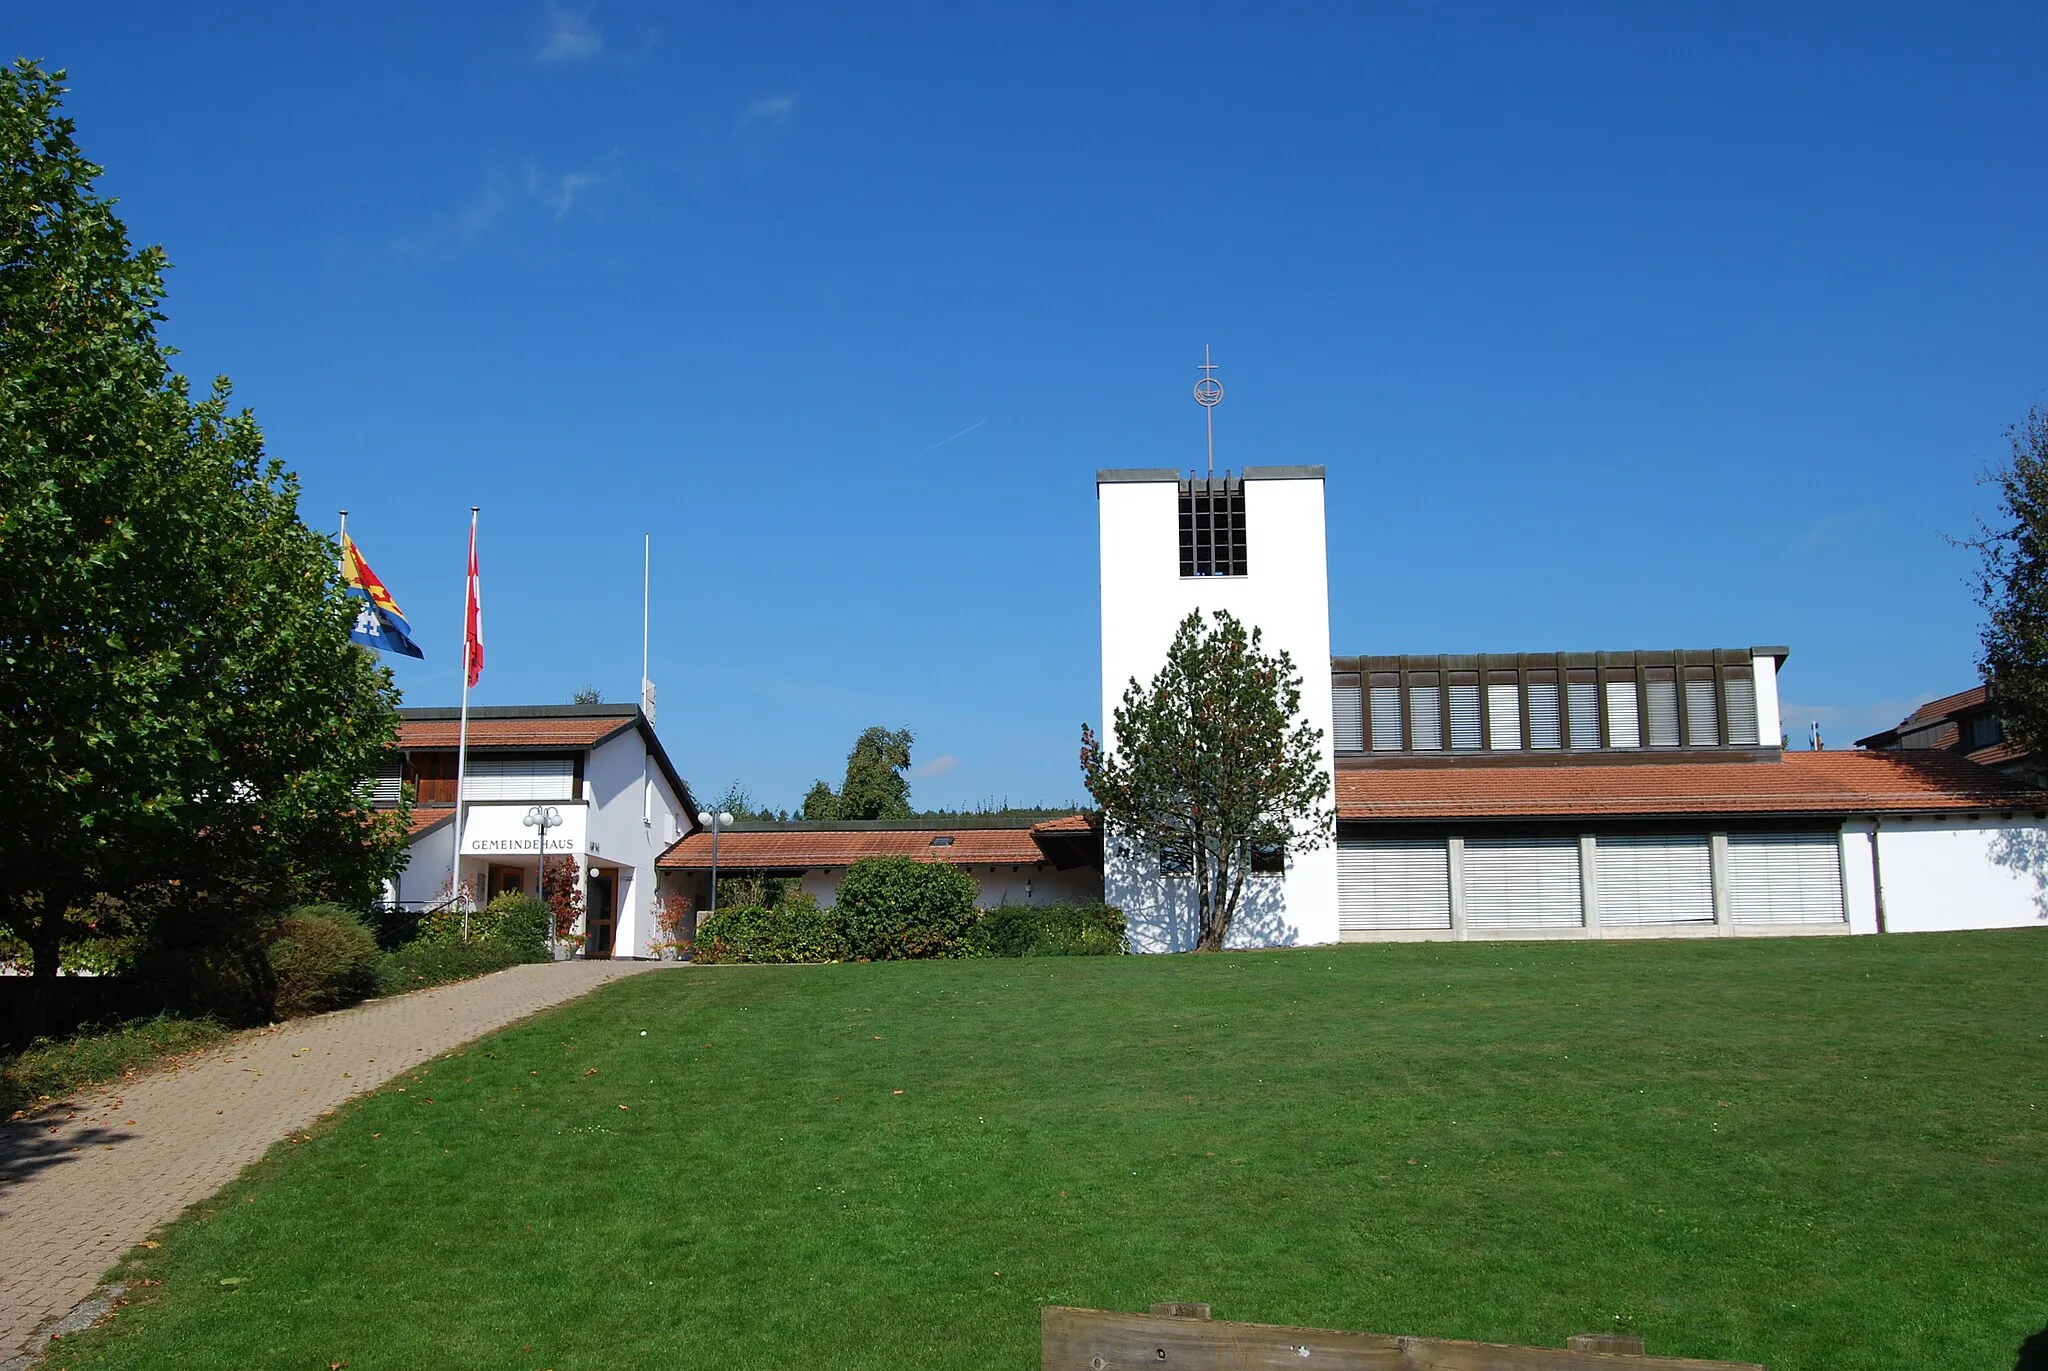 Photo showing: Municipal administration and church of Arni, canton of Aargau, Switzerland